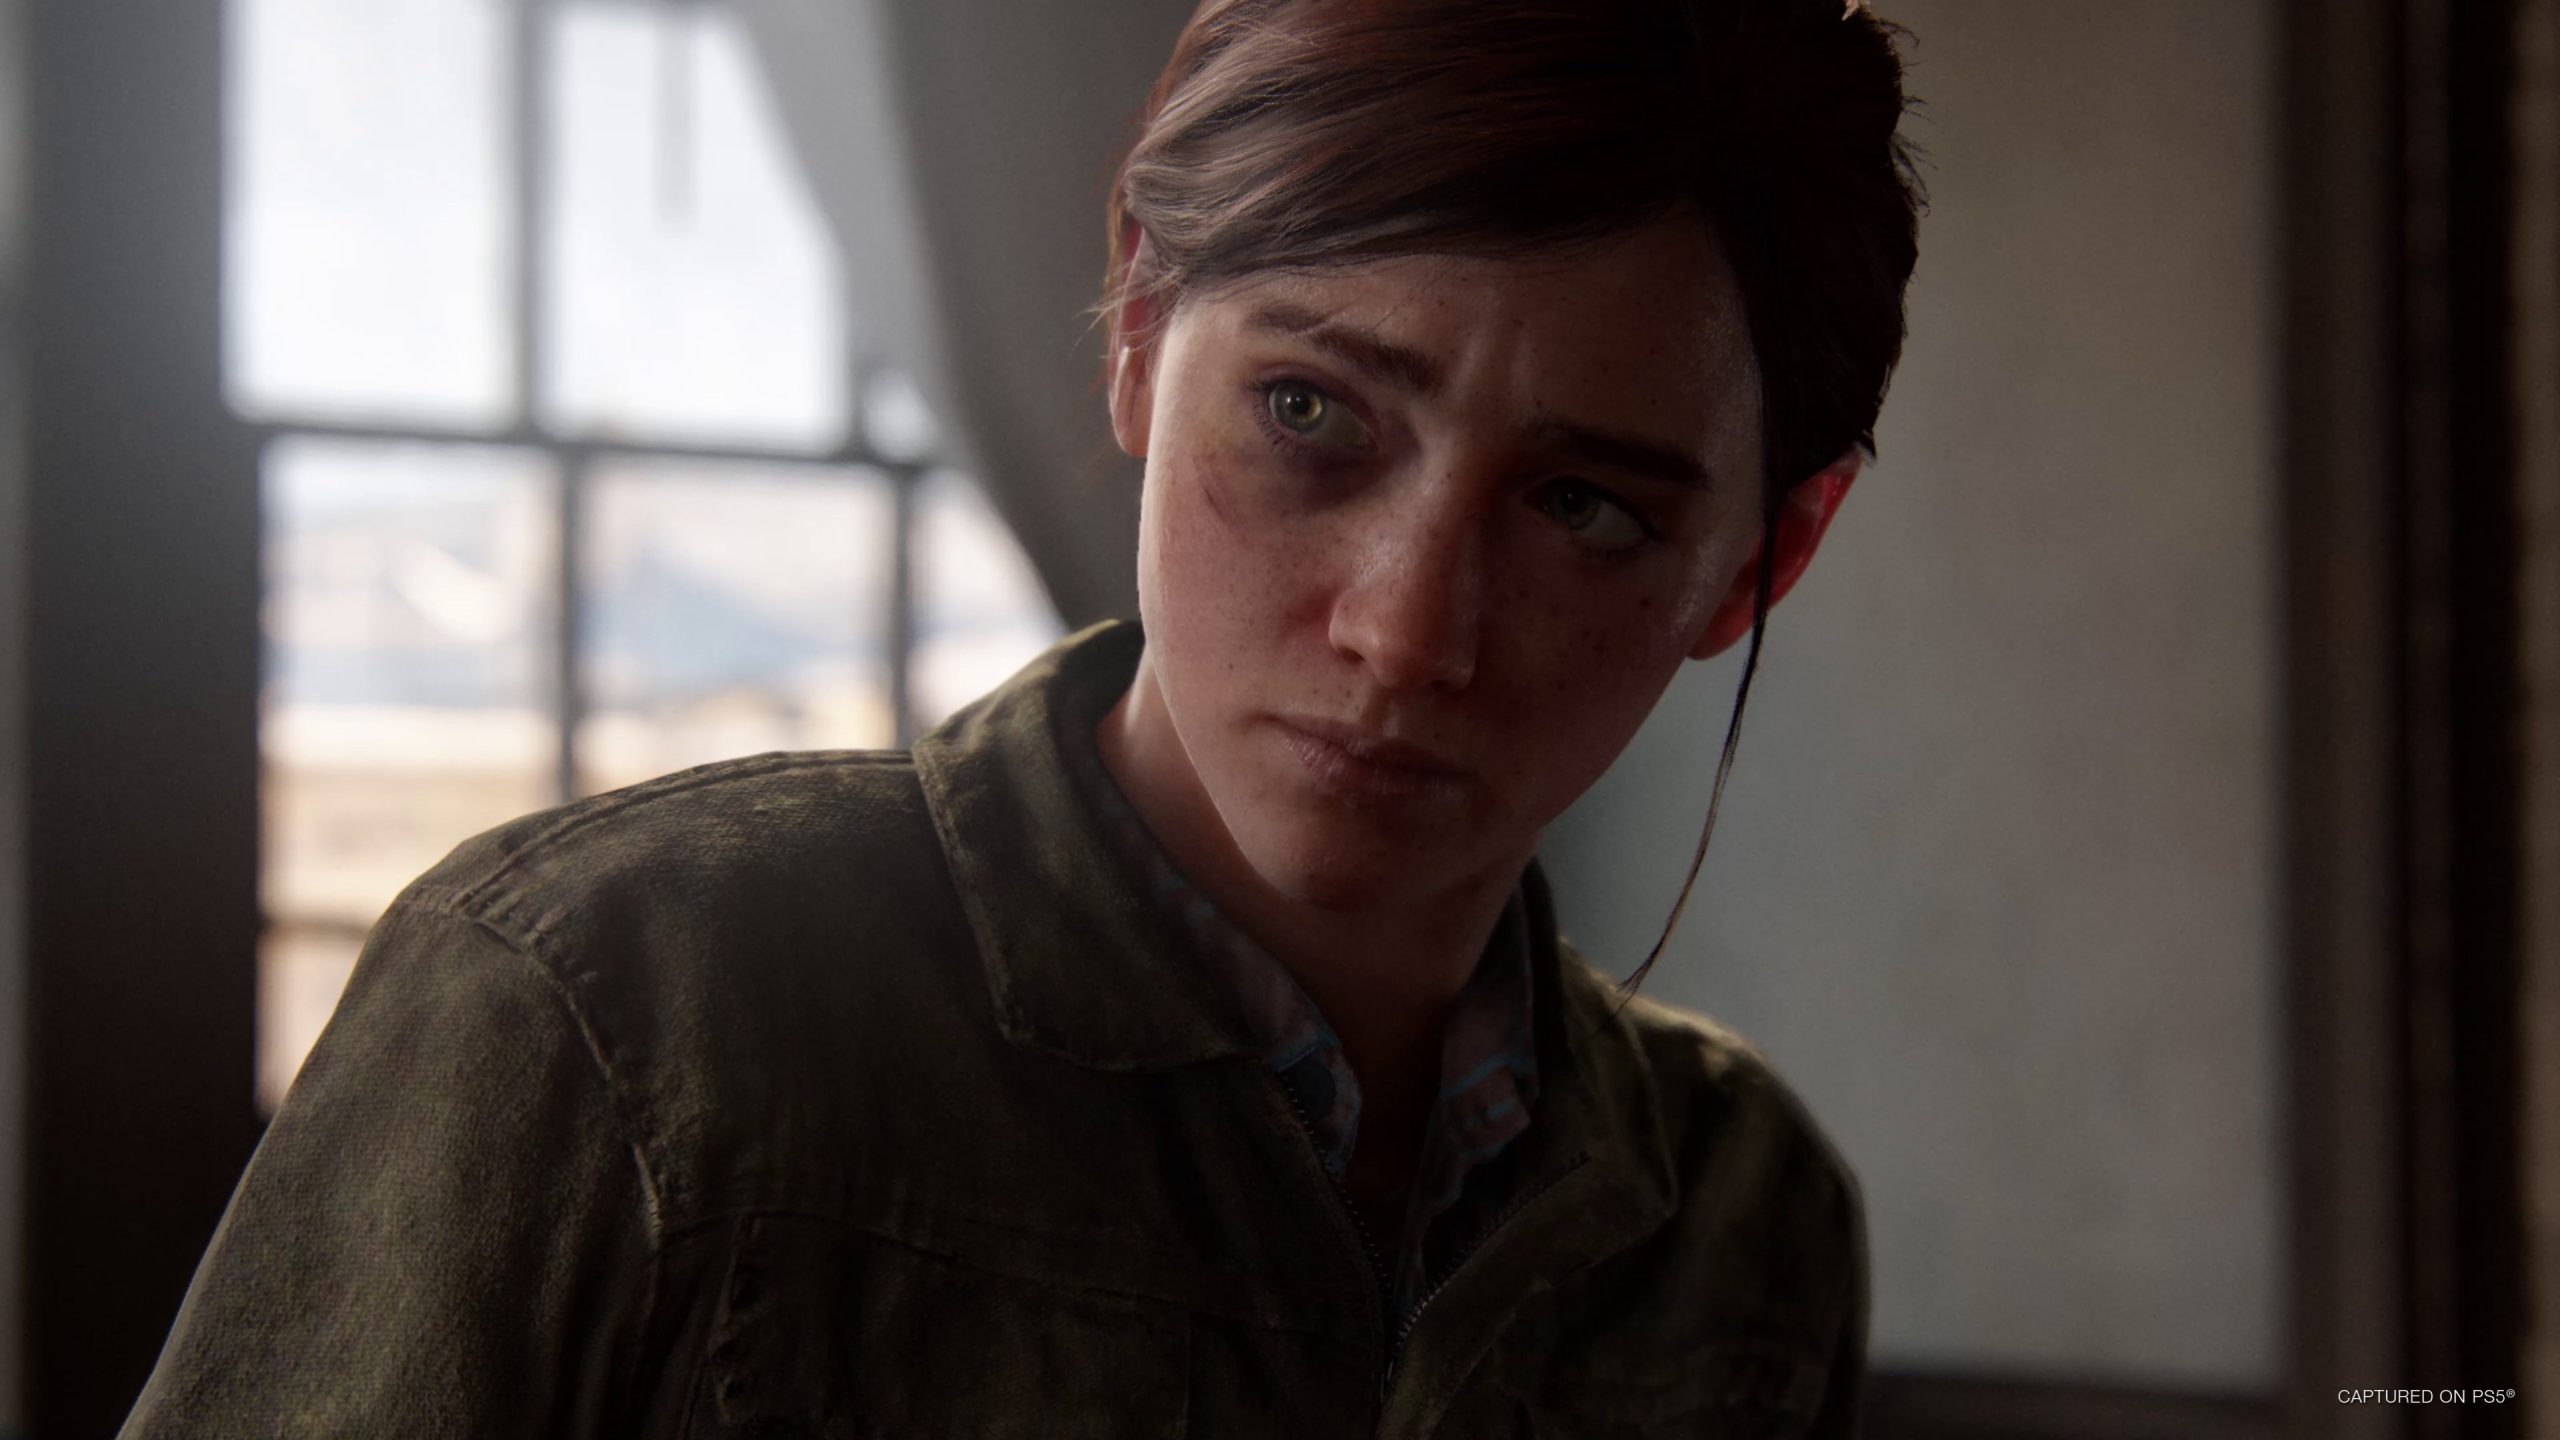 The Last of Us Part 2 Remastered Handled by New Hires, Druckmann Working on Original Game – Rumor